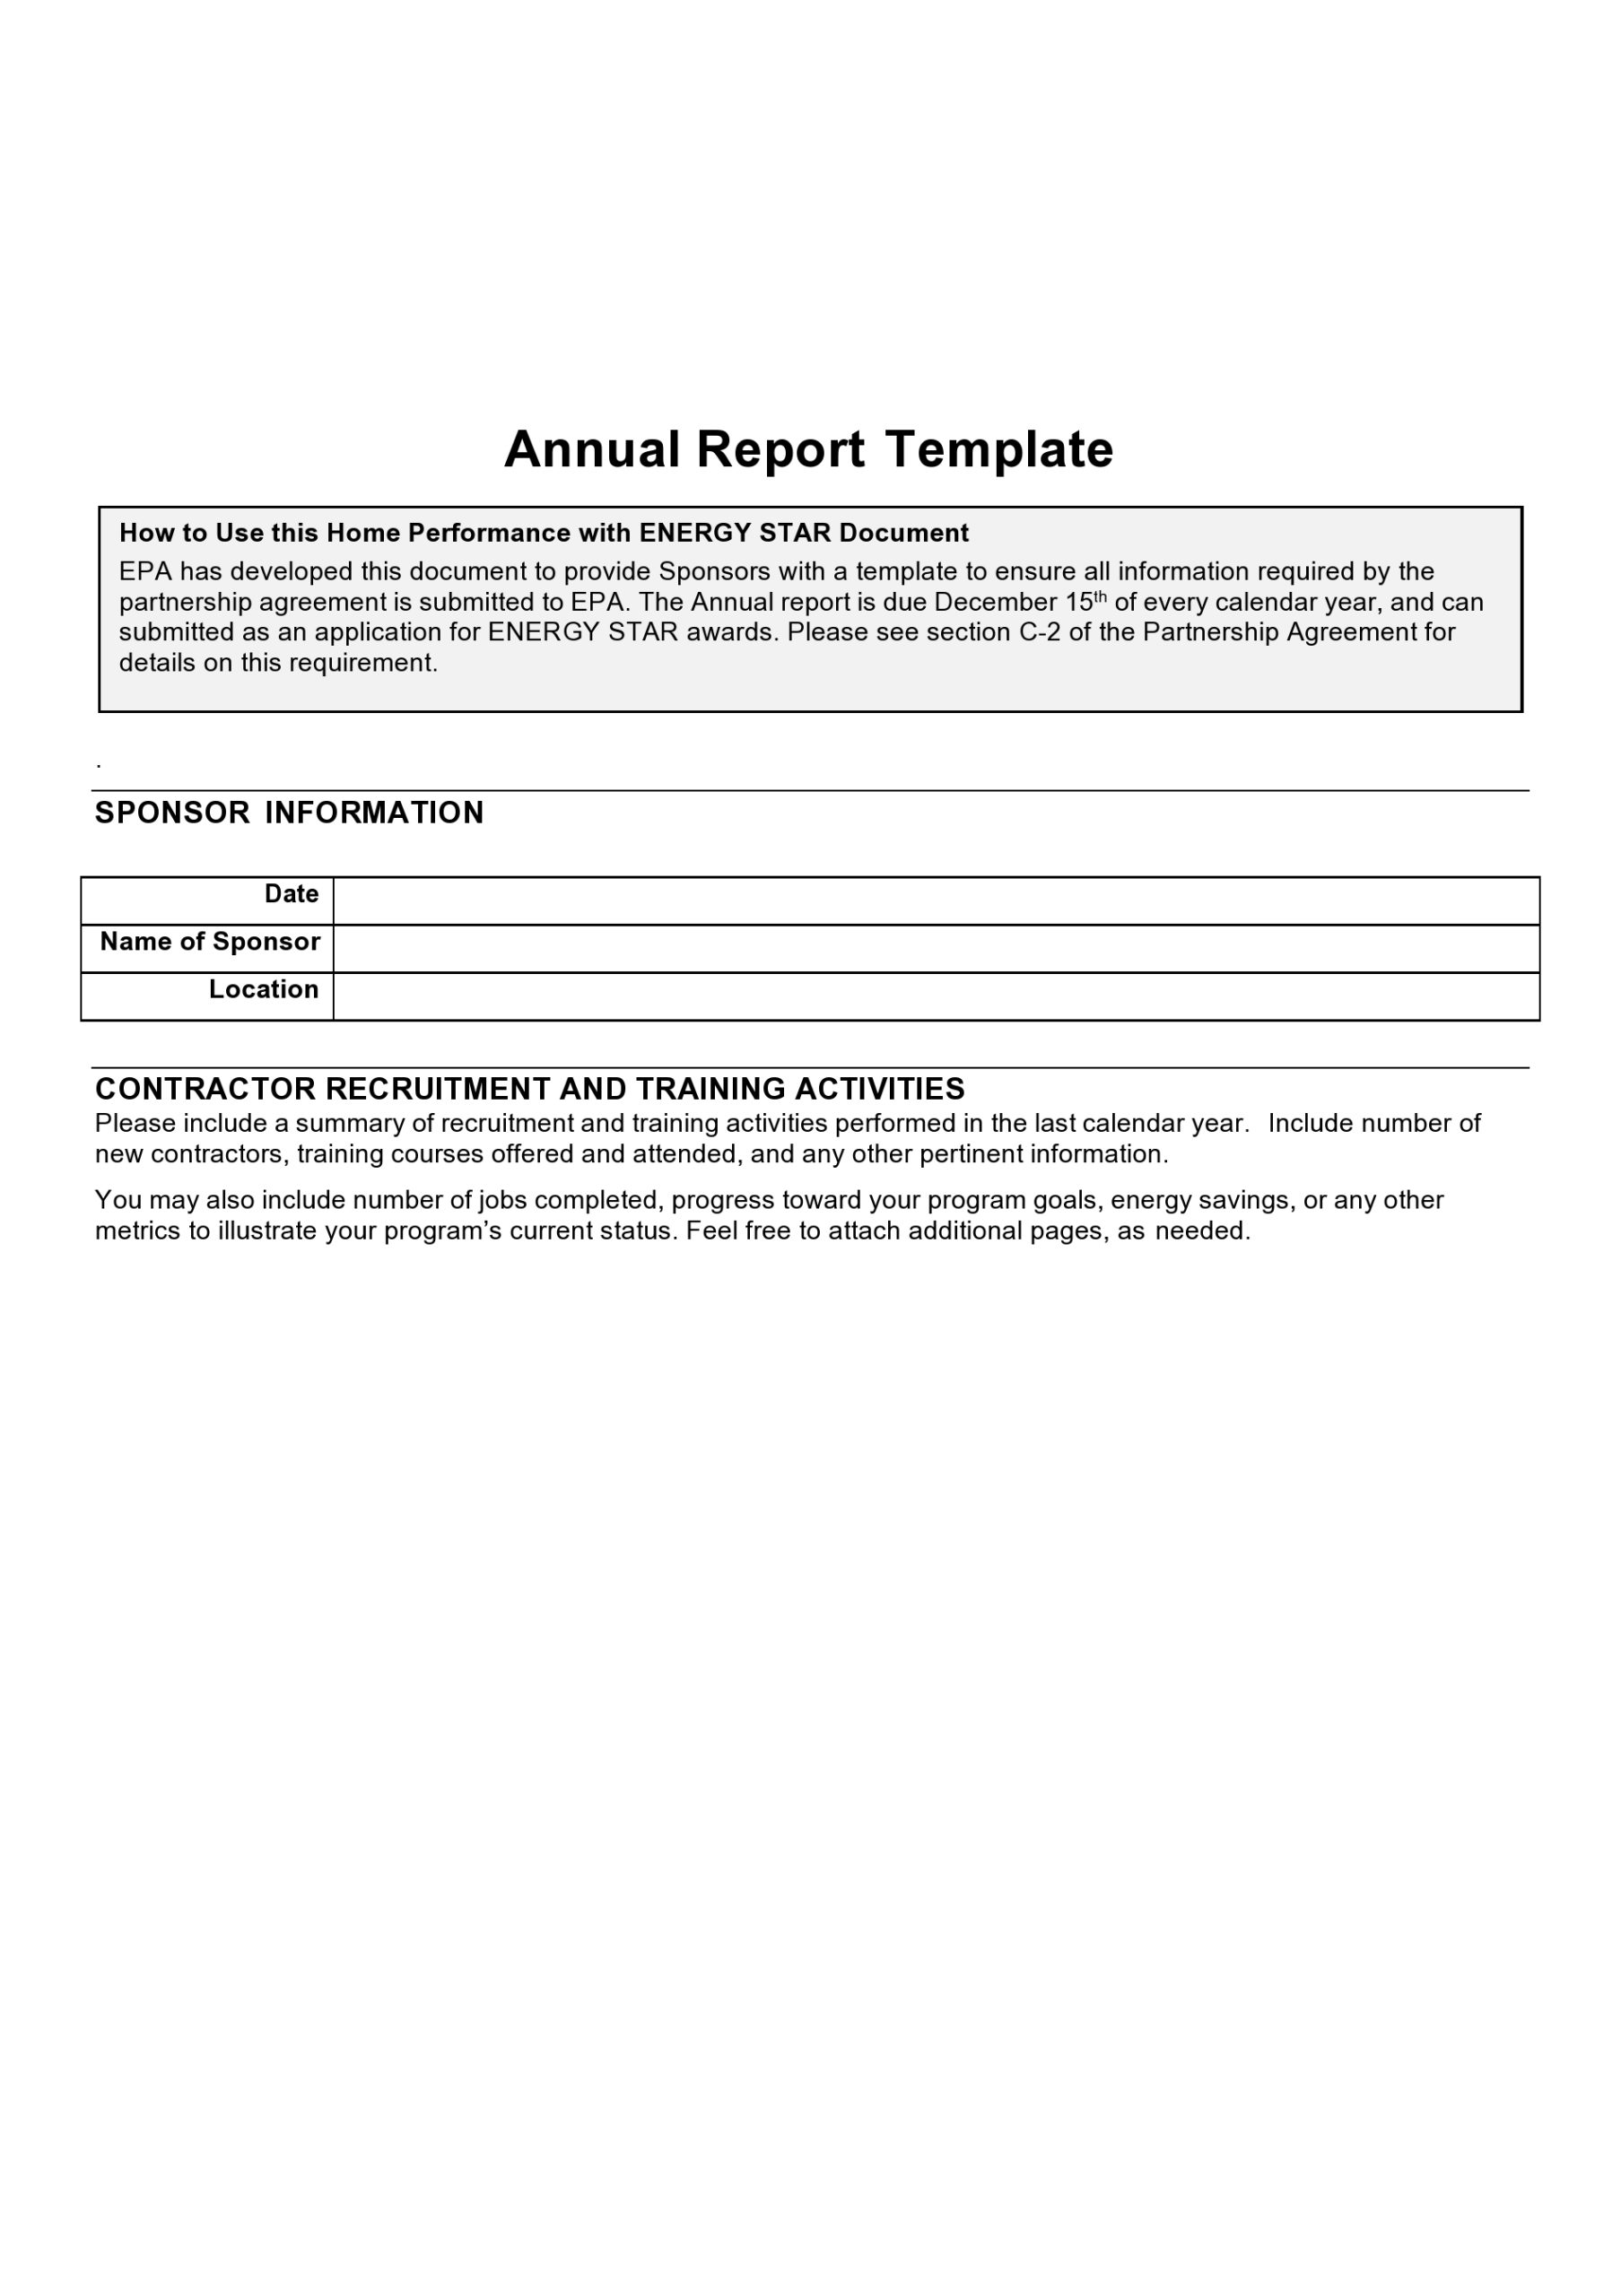 Free annual report template 48